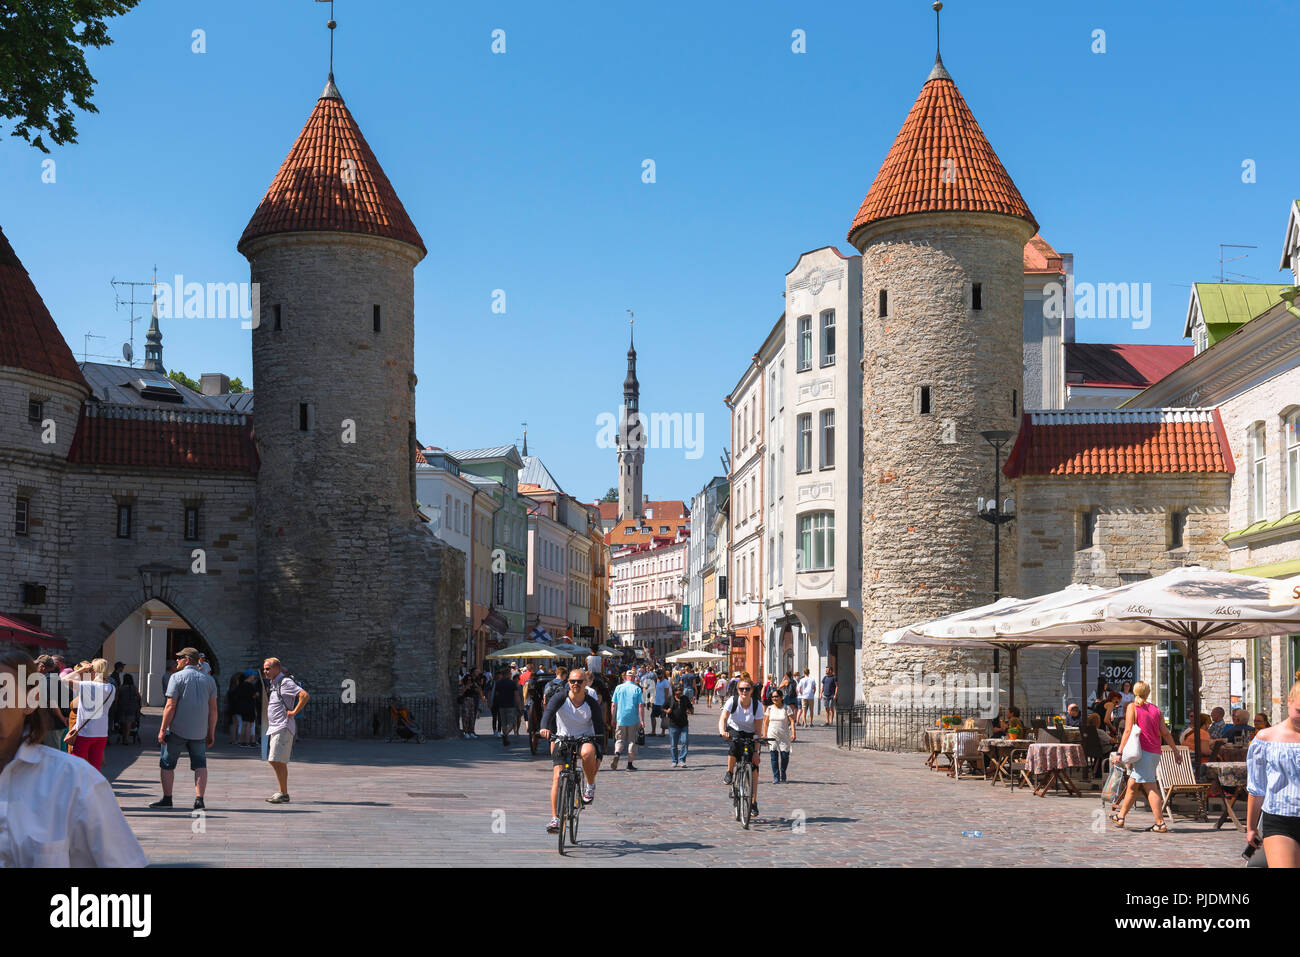 Tallinn Viru Gate, view of the Viru Gate in Tallinn - the eastern entrance  to the central medieval Old Town quarter of the city, Estonia Stock Photo -  Alamy